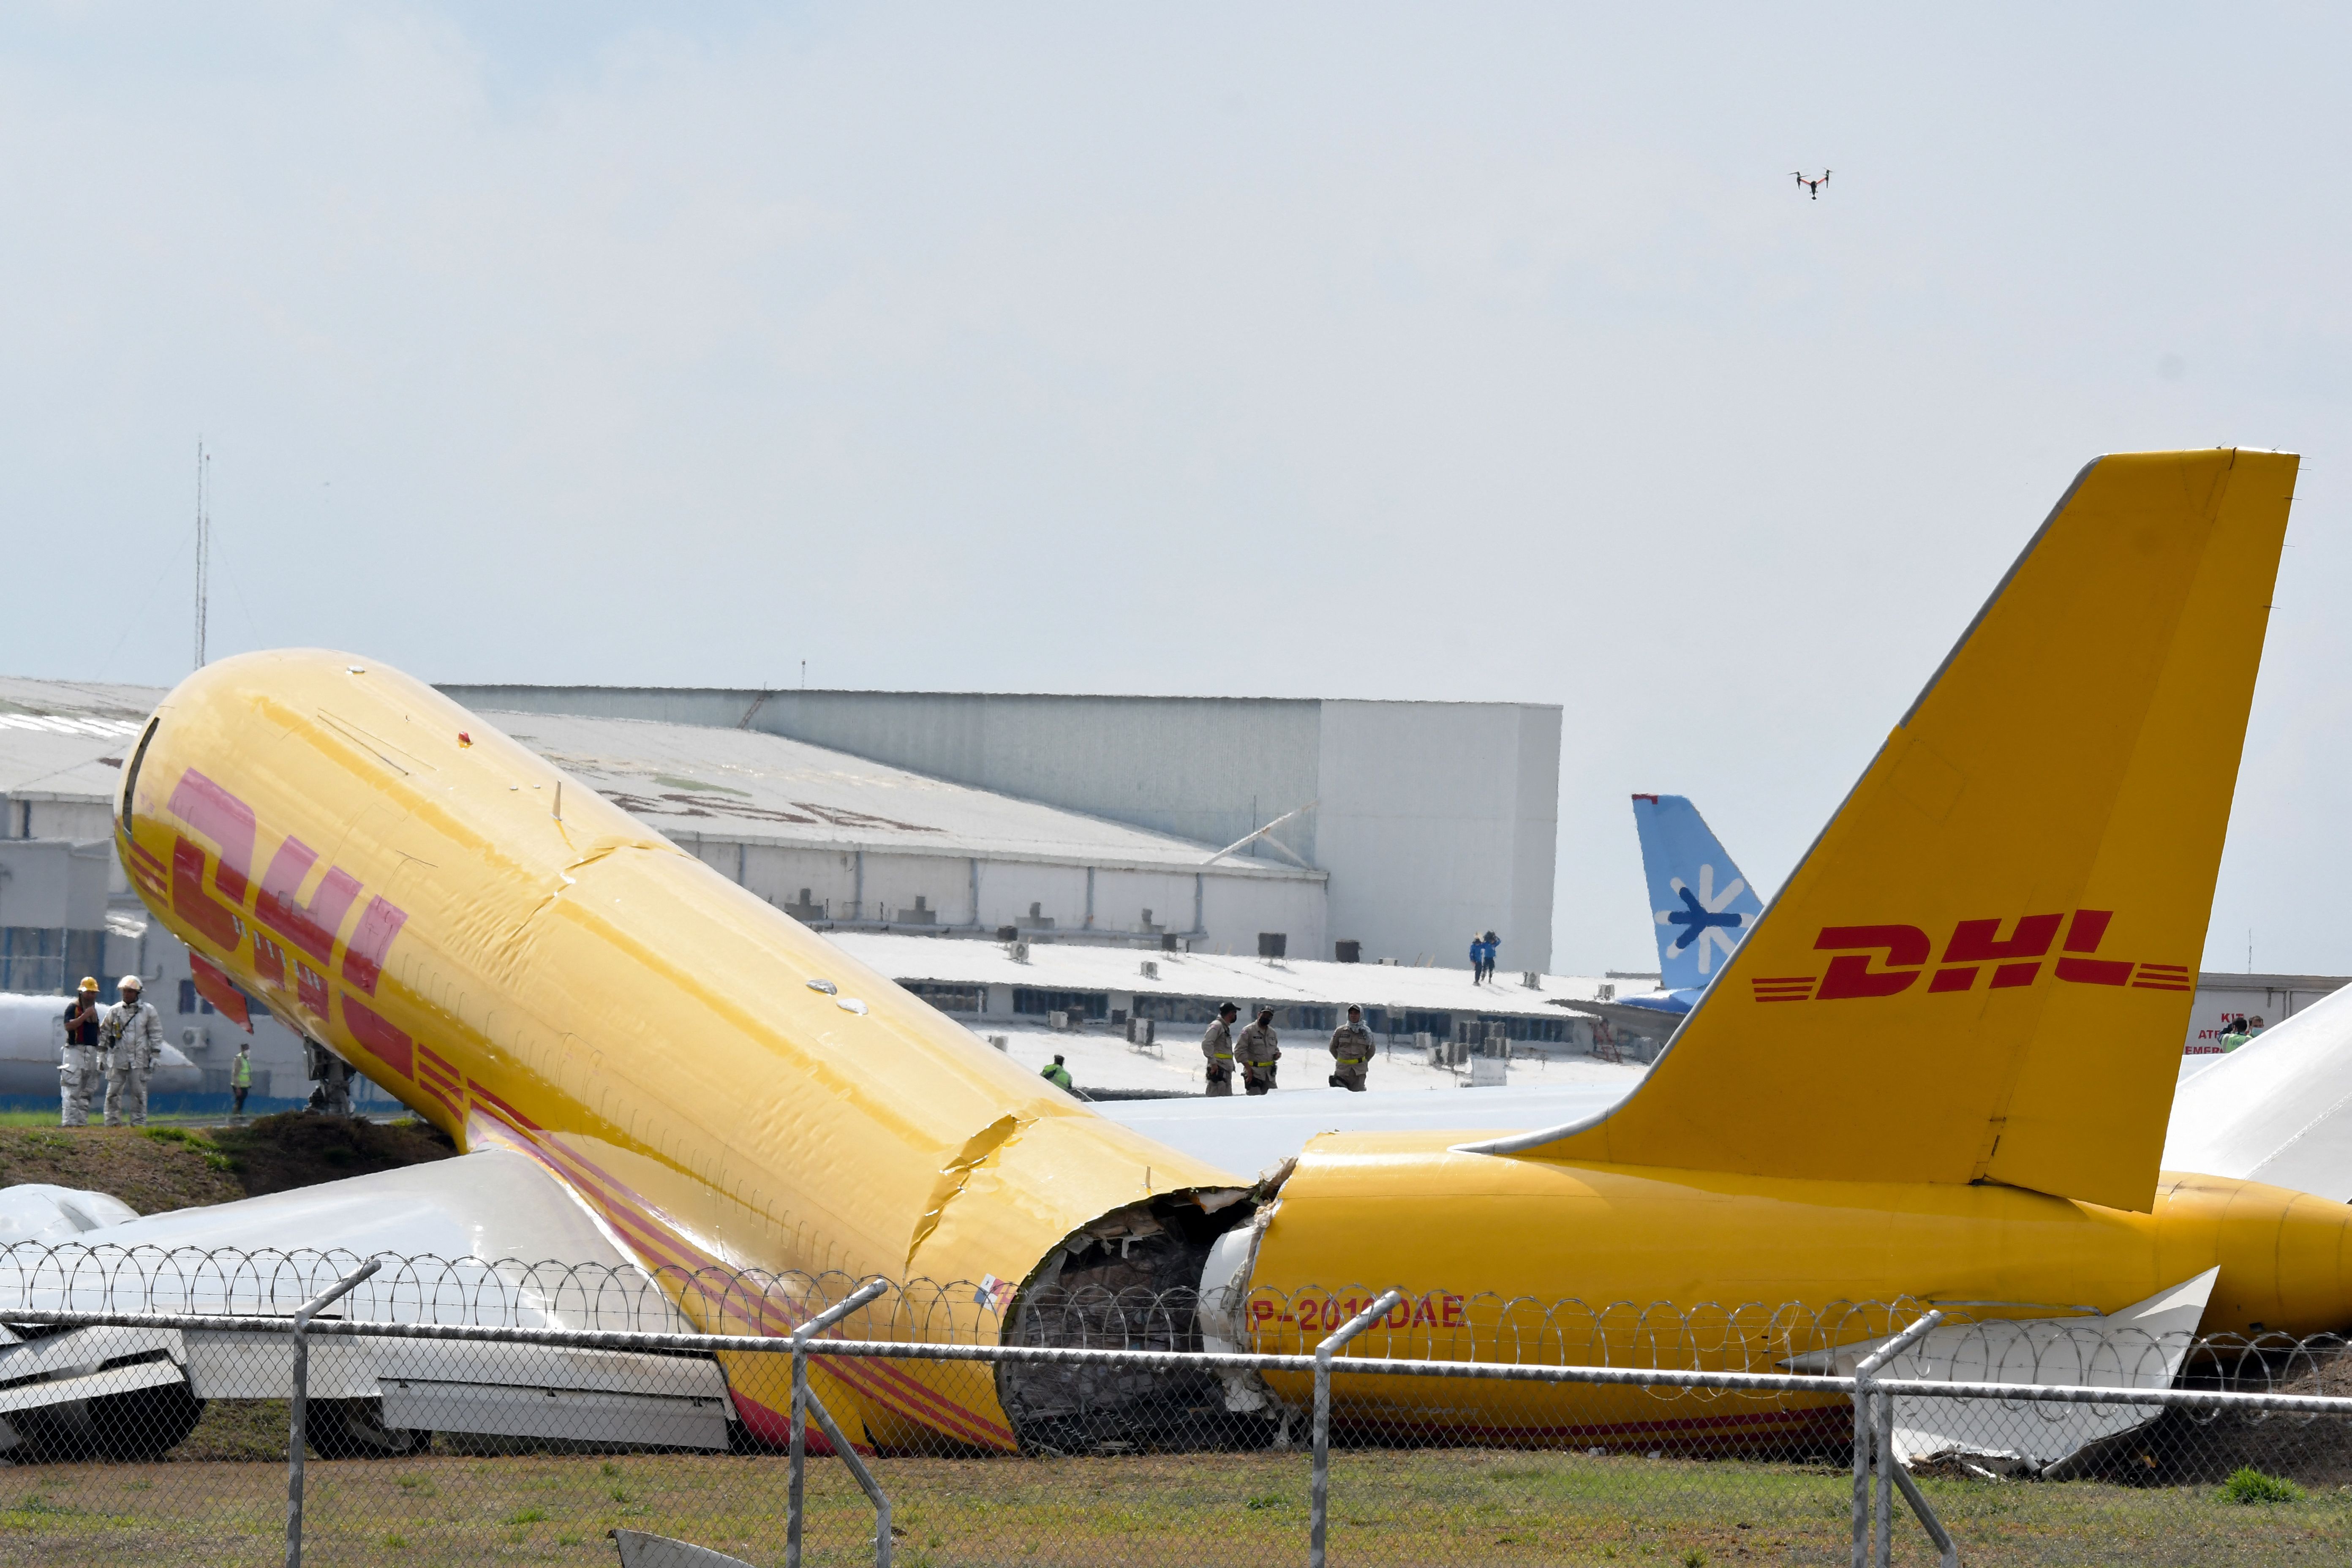 A DHL aircraft suffered an accident in San José Costa Rica. 